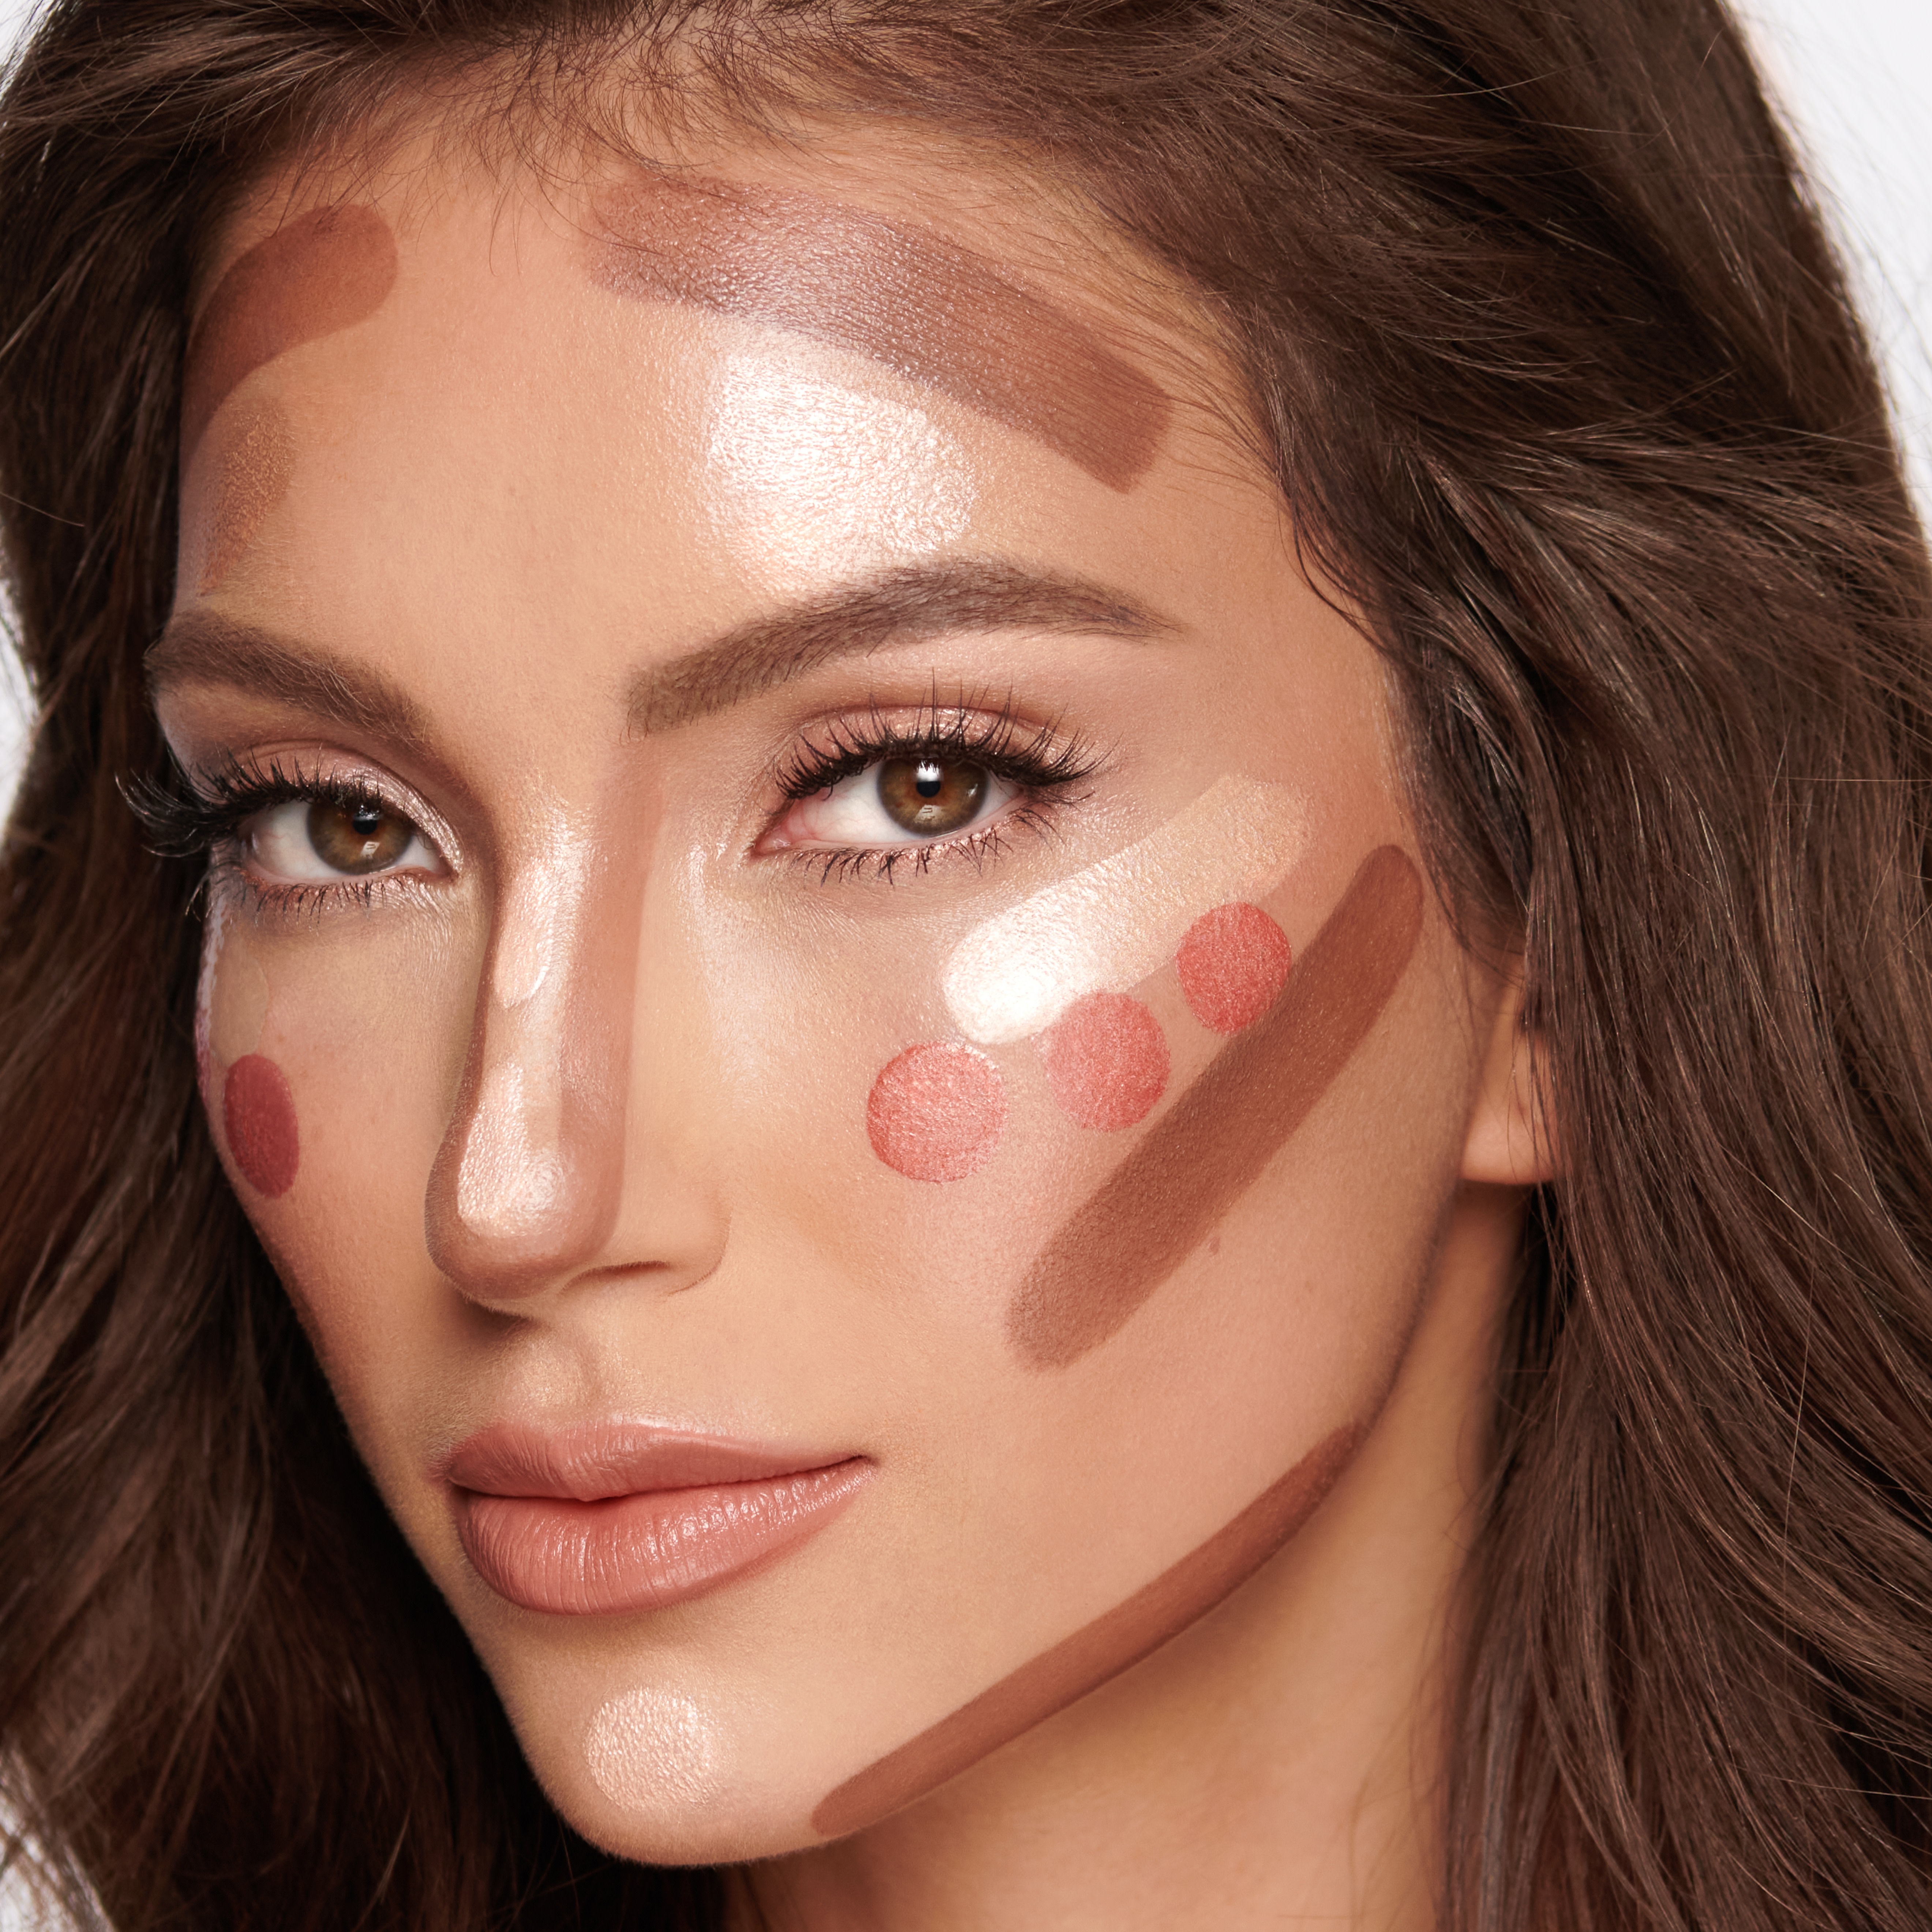 A medium-tone model with unblended liquid contour, blush, and highlighter.